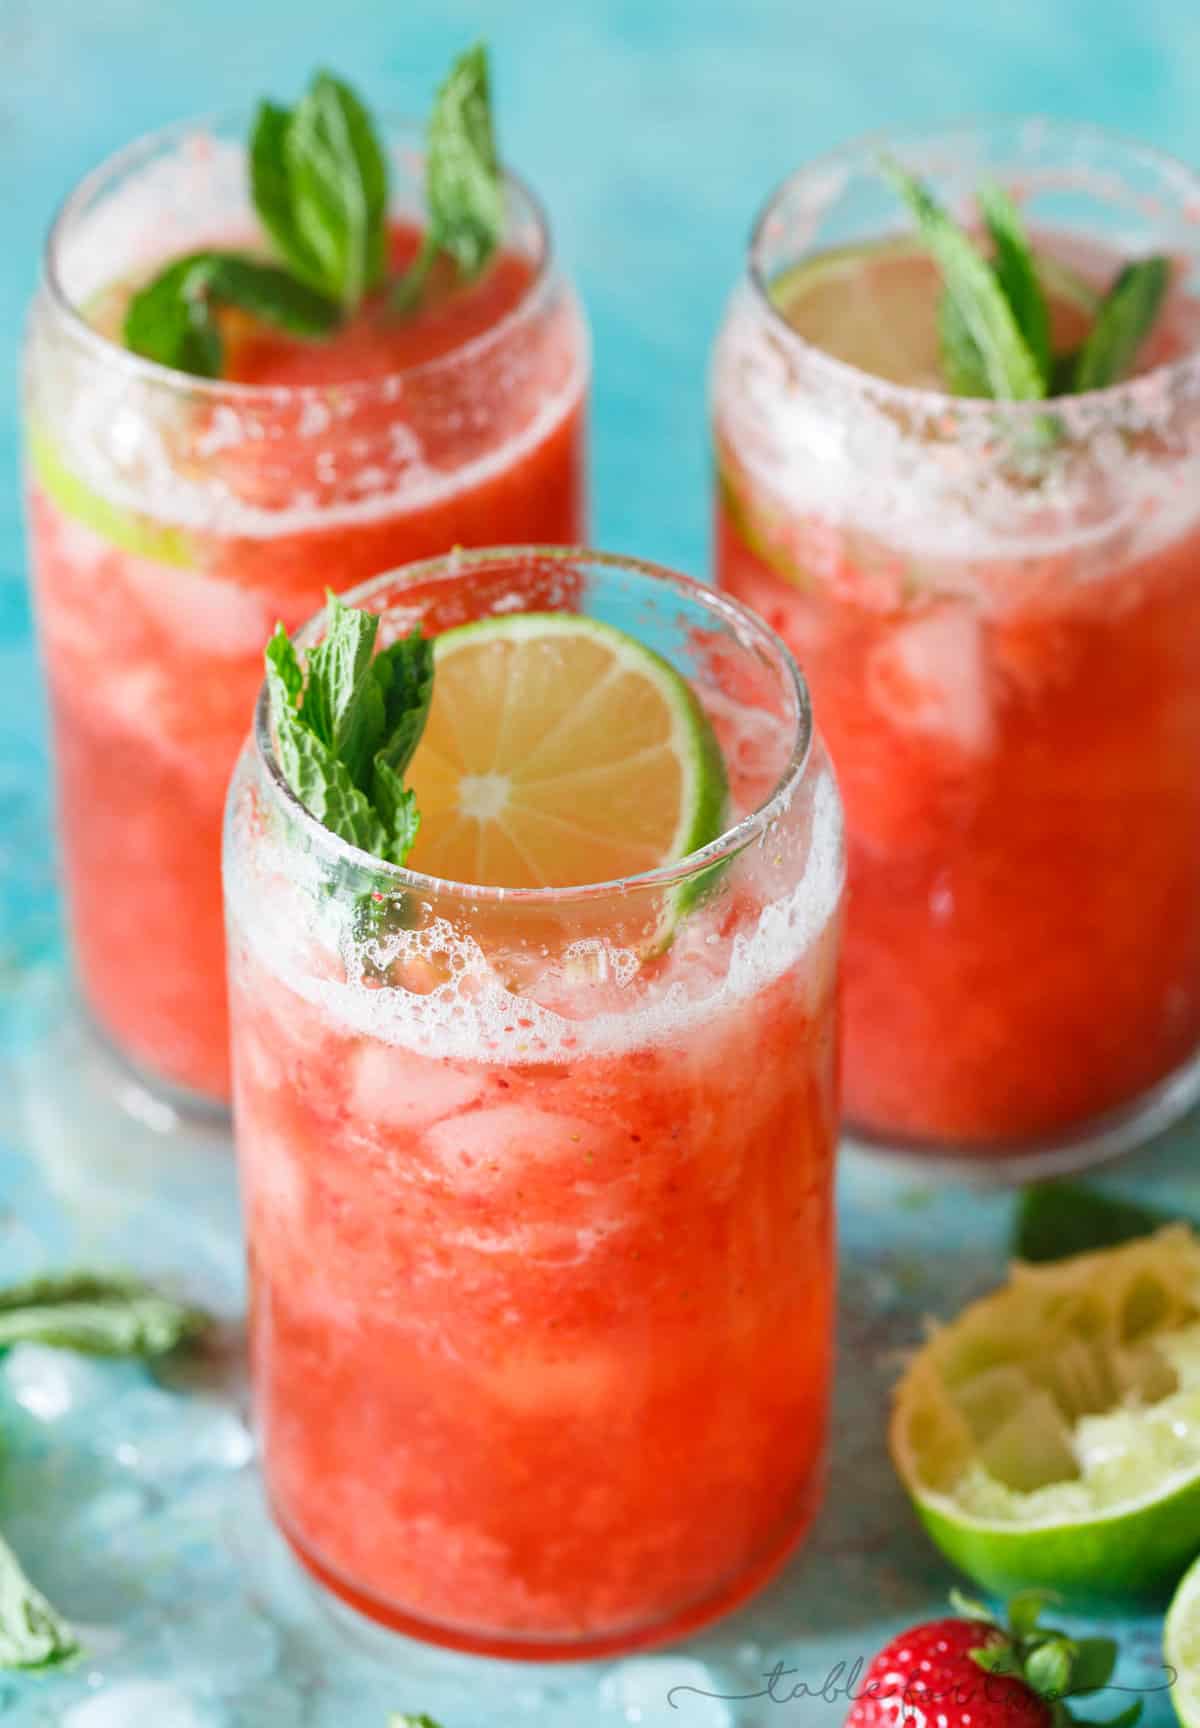 This refreshing strawberry rosé mint limeade is made with fresh seasonal ingredients! You will love sipping on this at your next outdoor party or get-together! Fresh strawberries are key and the refreshing mint and tangy lime juice rounds out the flavors of this drink perfectly! Serve with or without alcohol!